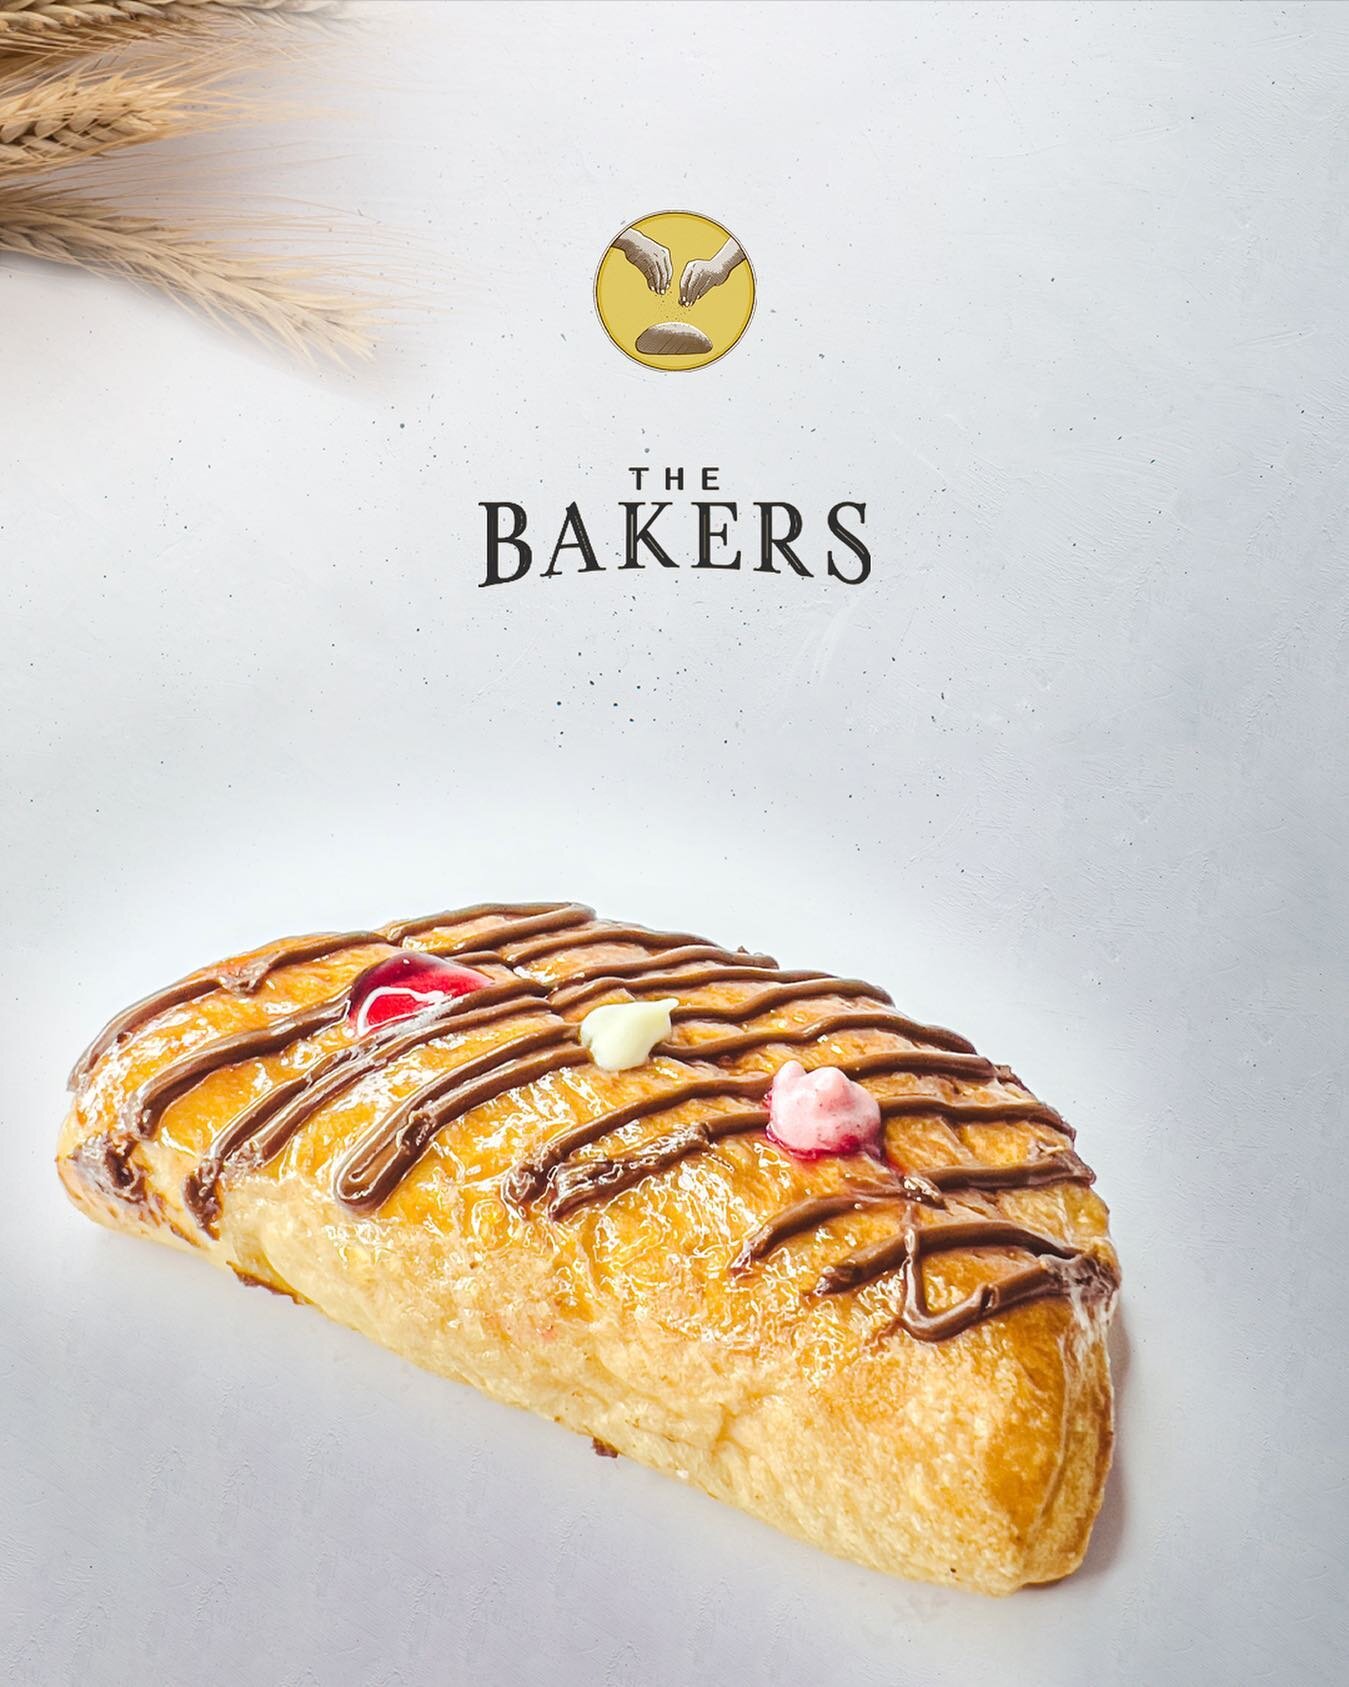 Craving The Bakers Hazelnut Danish? 😋 Drop by one of our Bakeries in Male&rsquo; or Hulhumale&rsquo;.